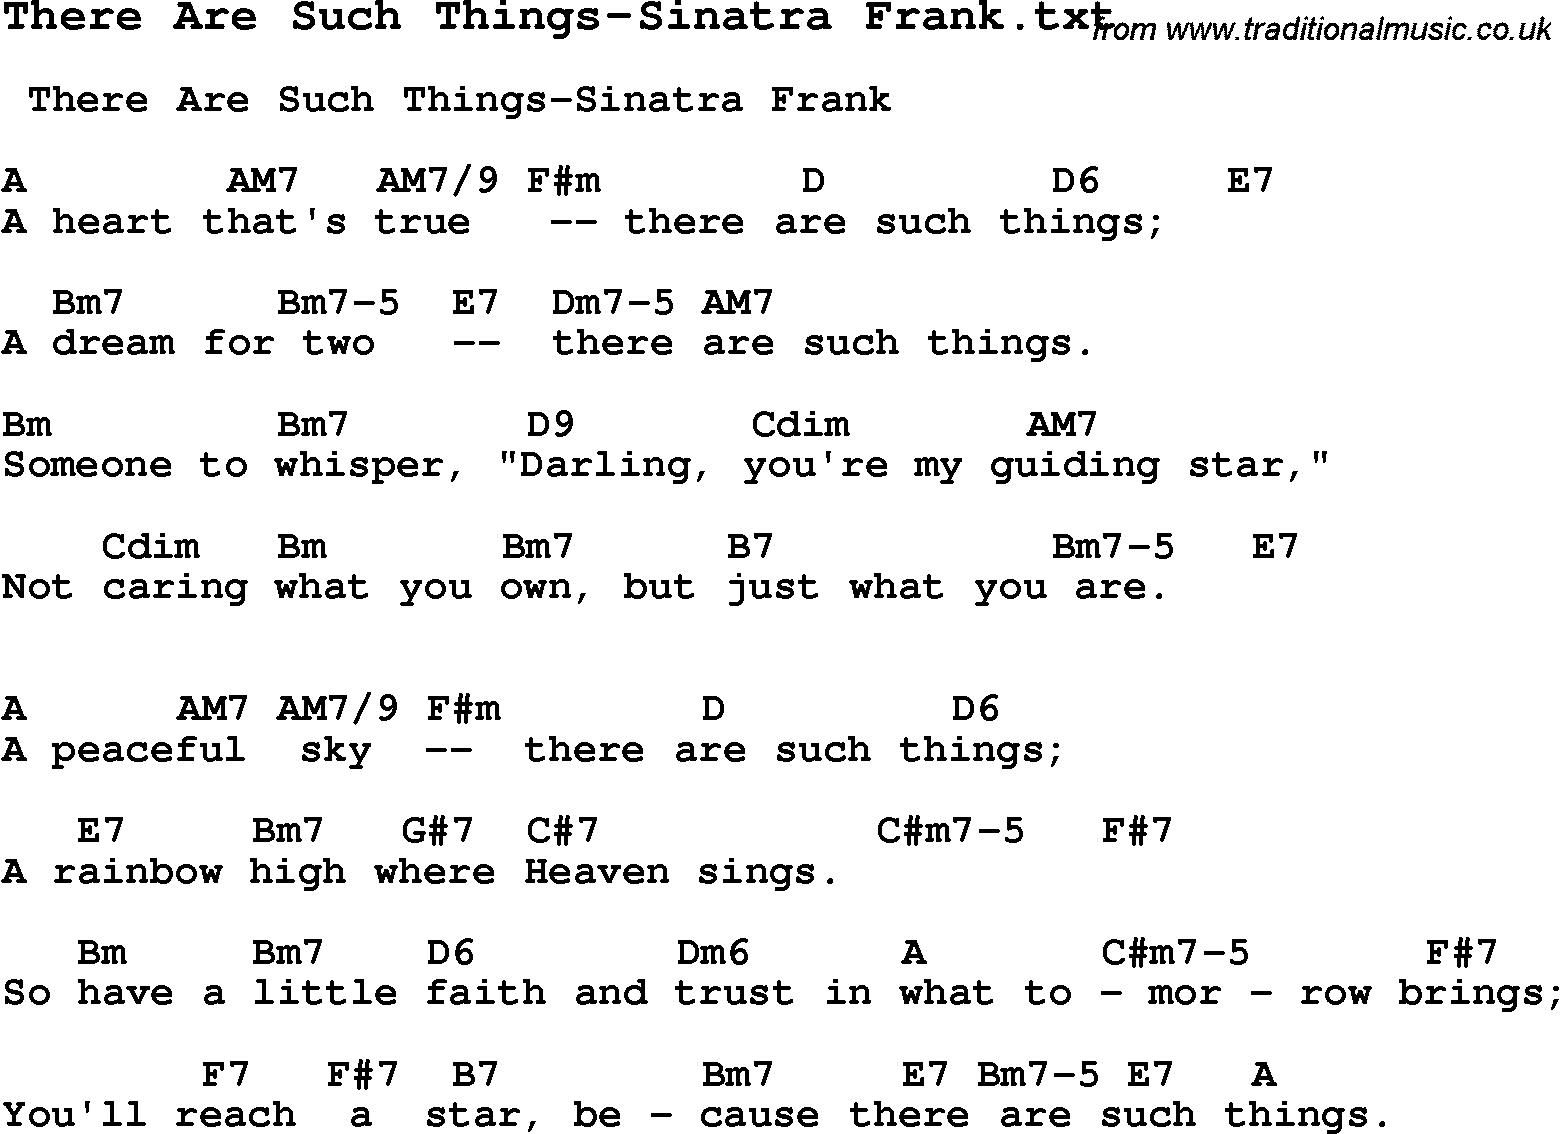 Jazz Song from top bands and vocal artists with chords, tabs and lyrics - There Are Such Things-Sinatra Frank